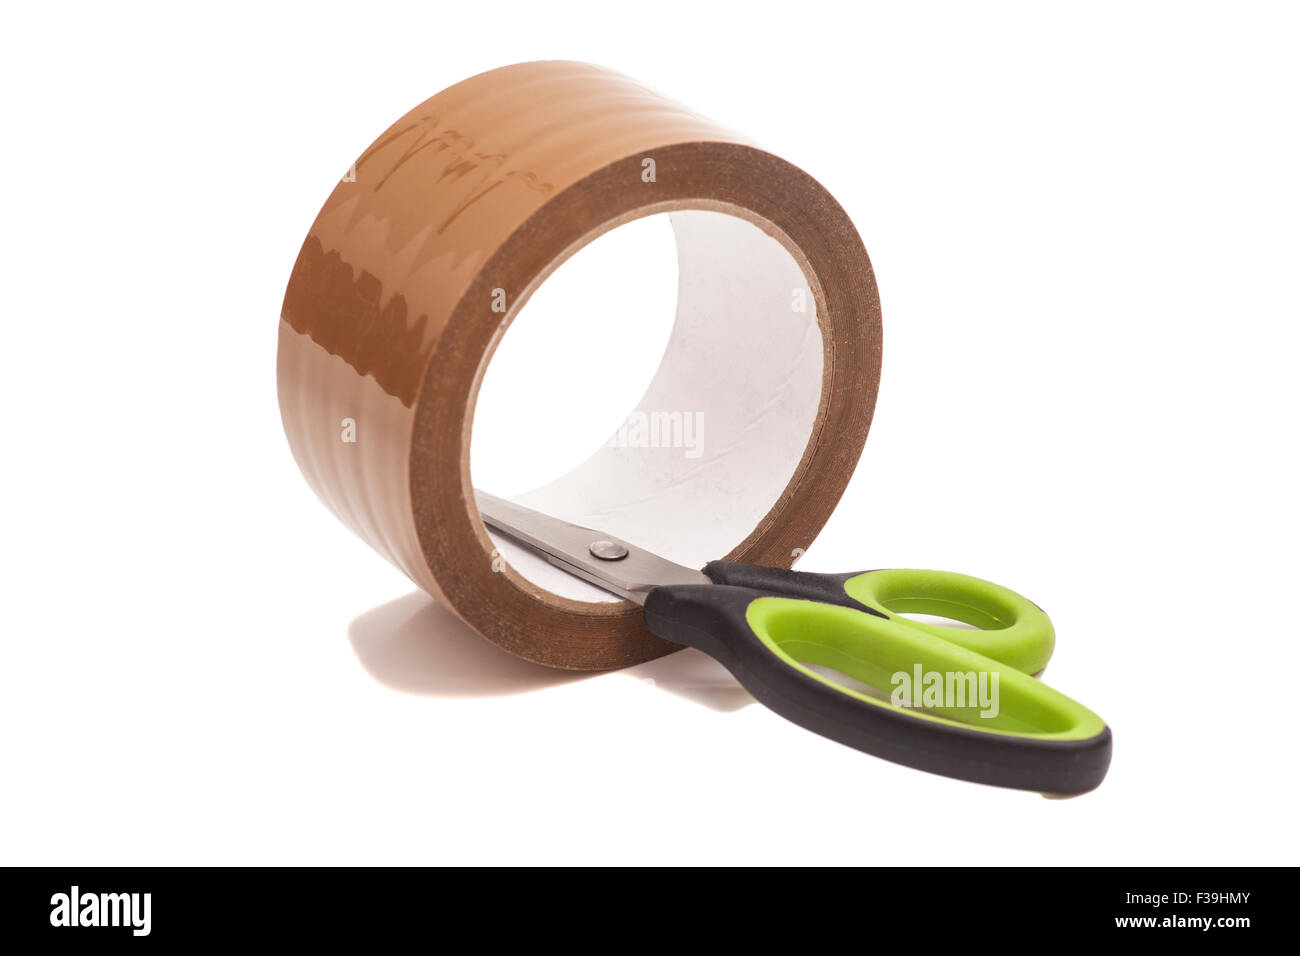 Scissors And Roll Of Duct Tape isolated on white Stock Photo